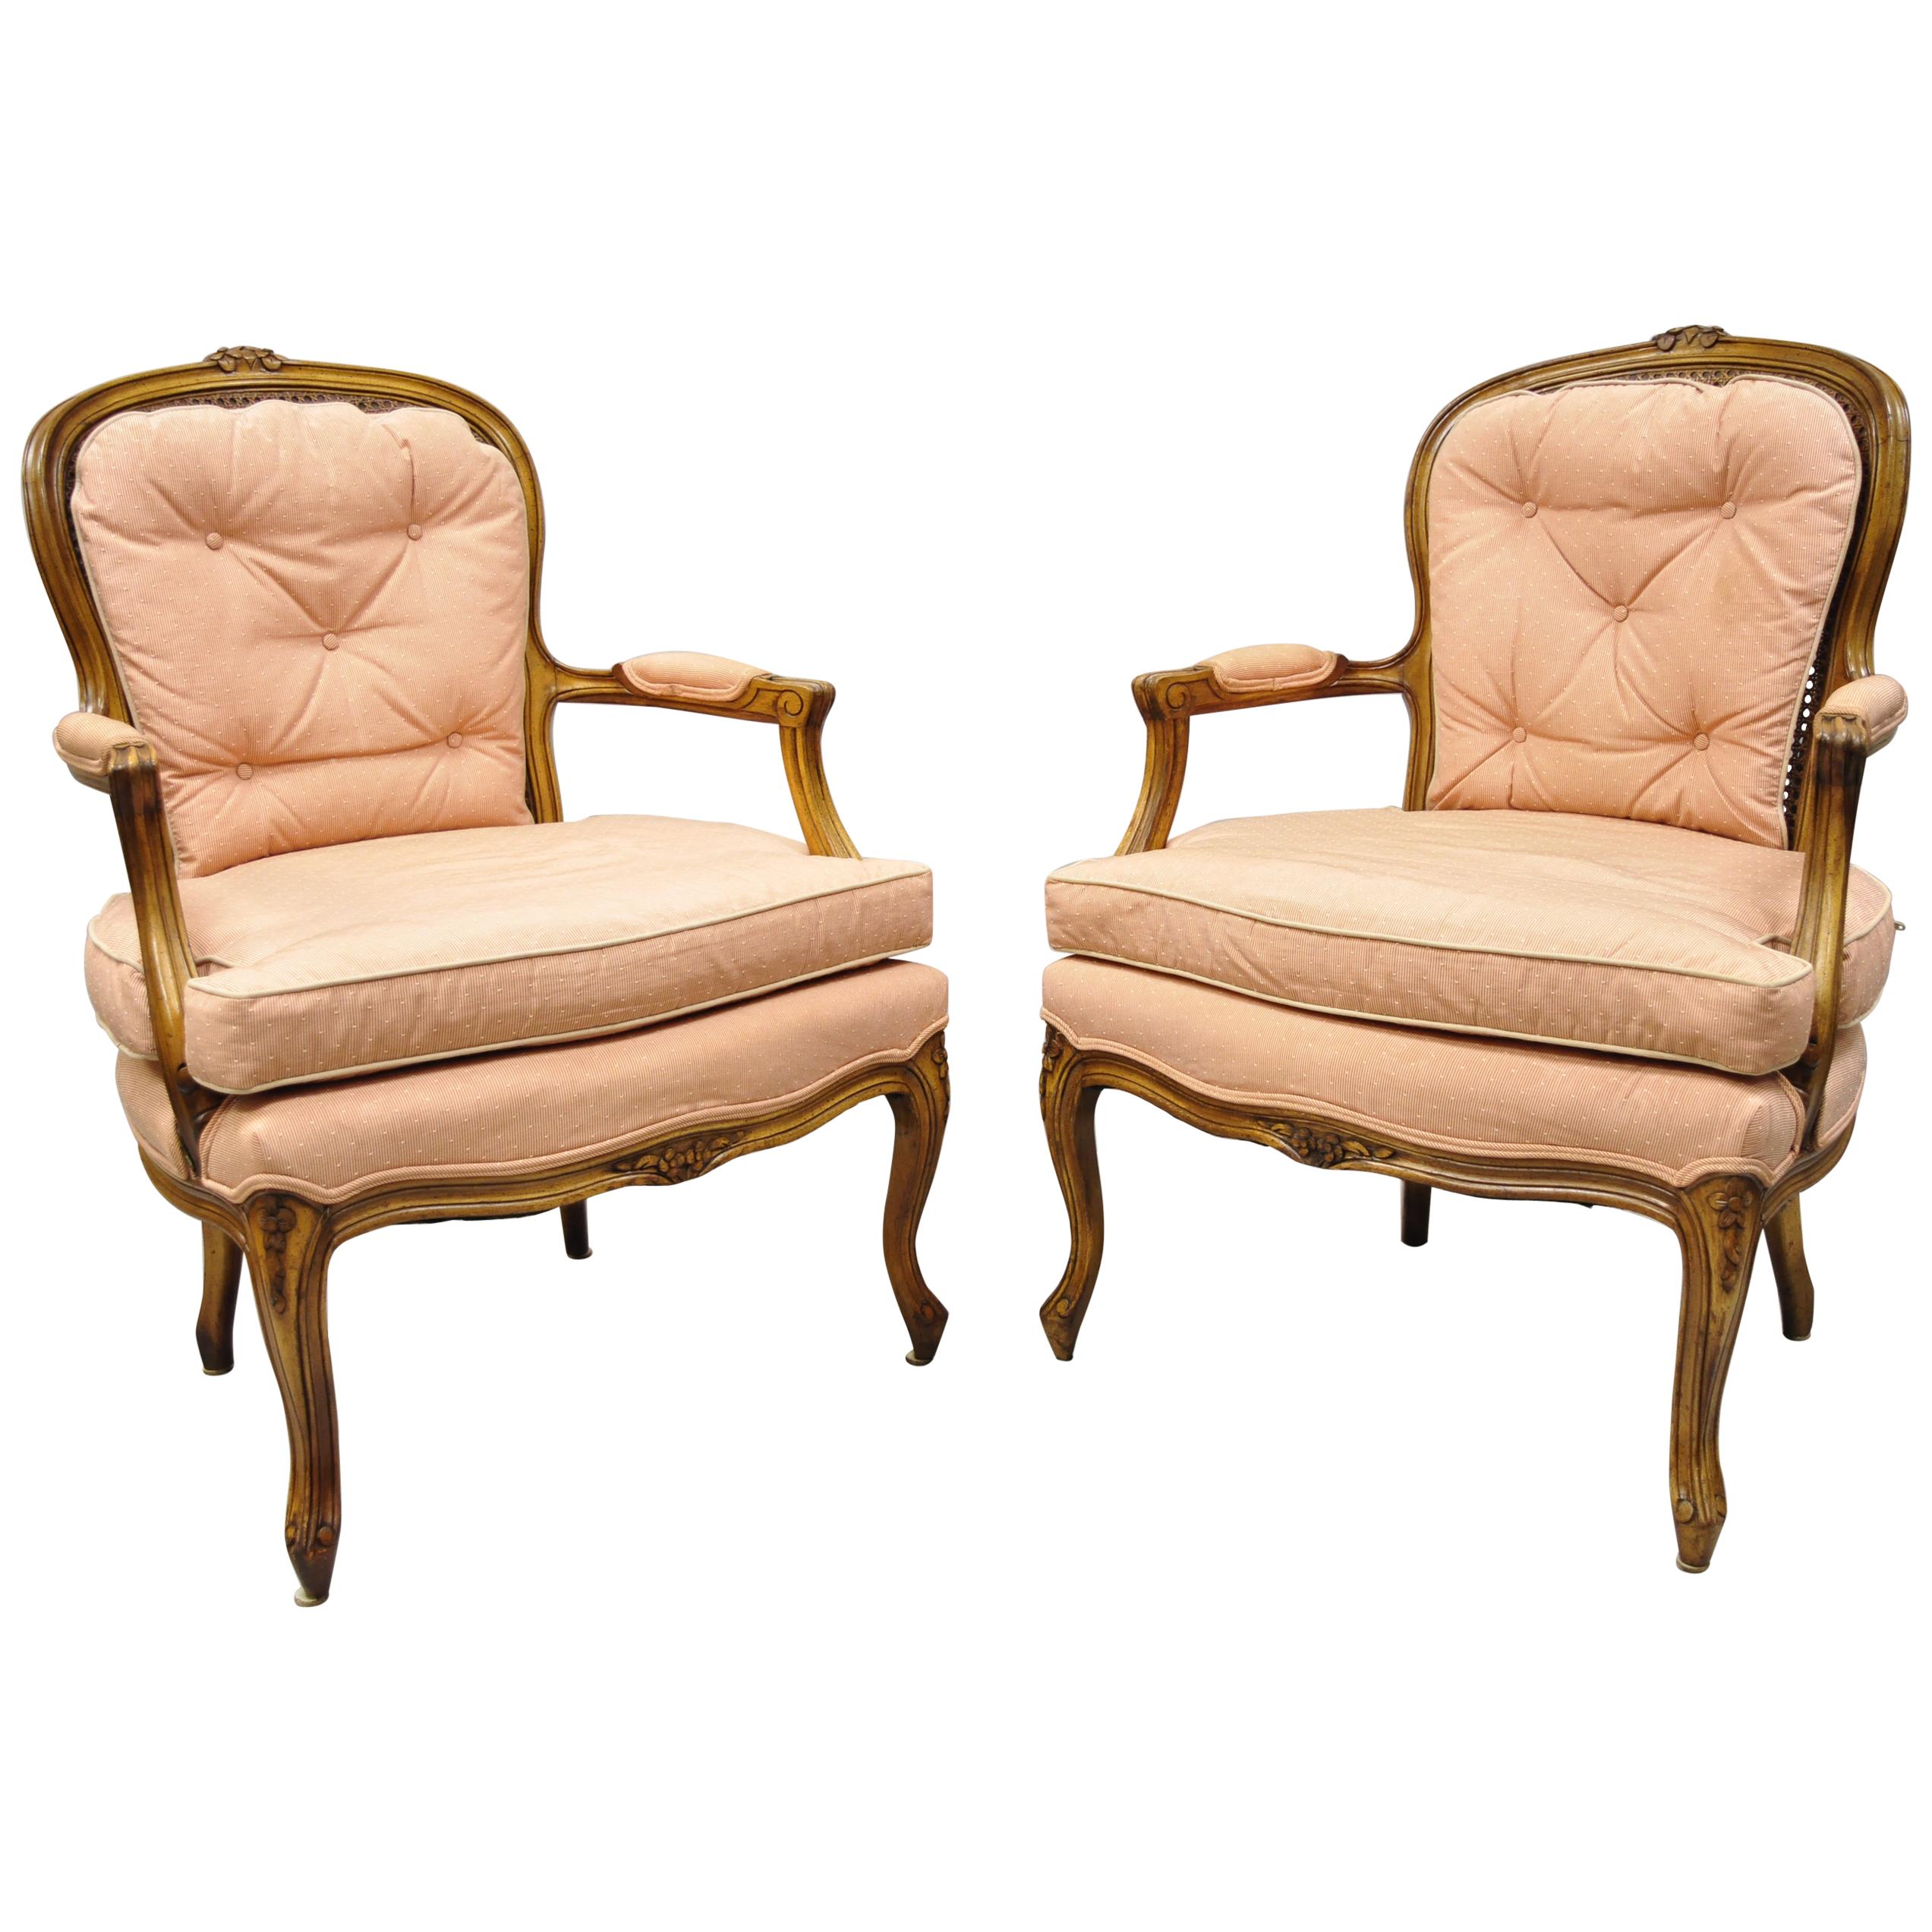 French Louis XV Provincial Style Carved Walnut Cane Back Armchairs, a Pair